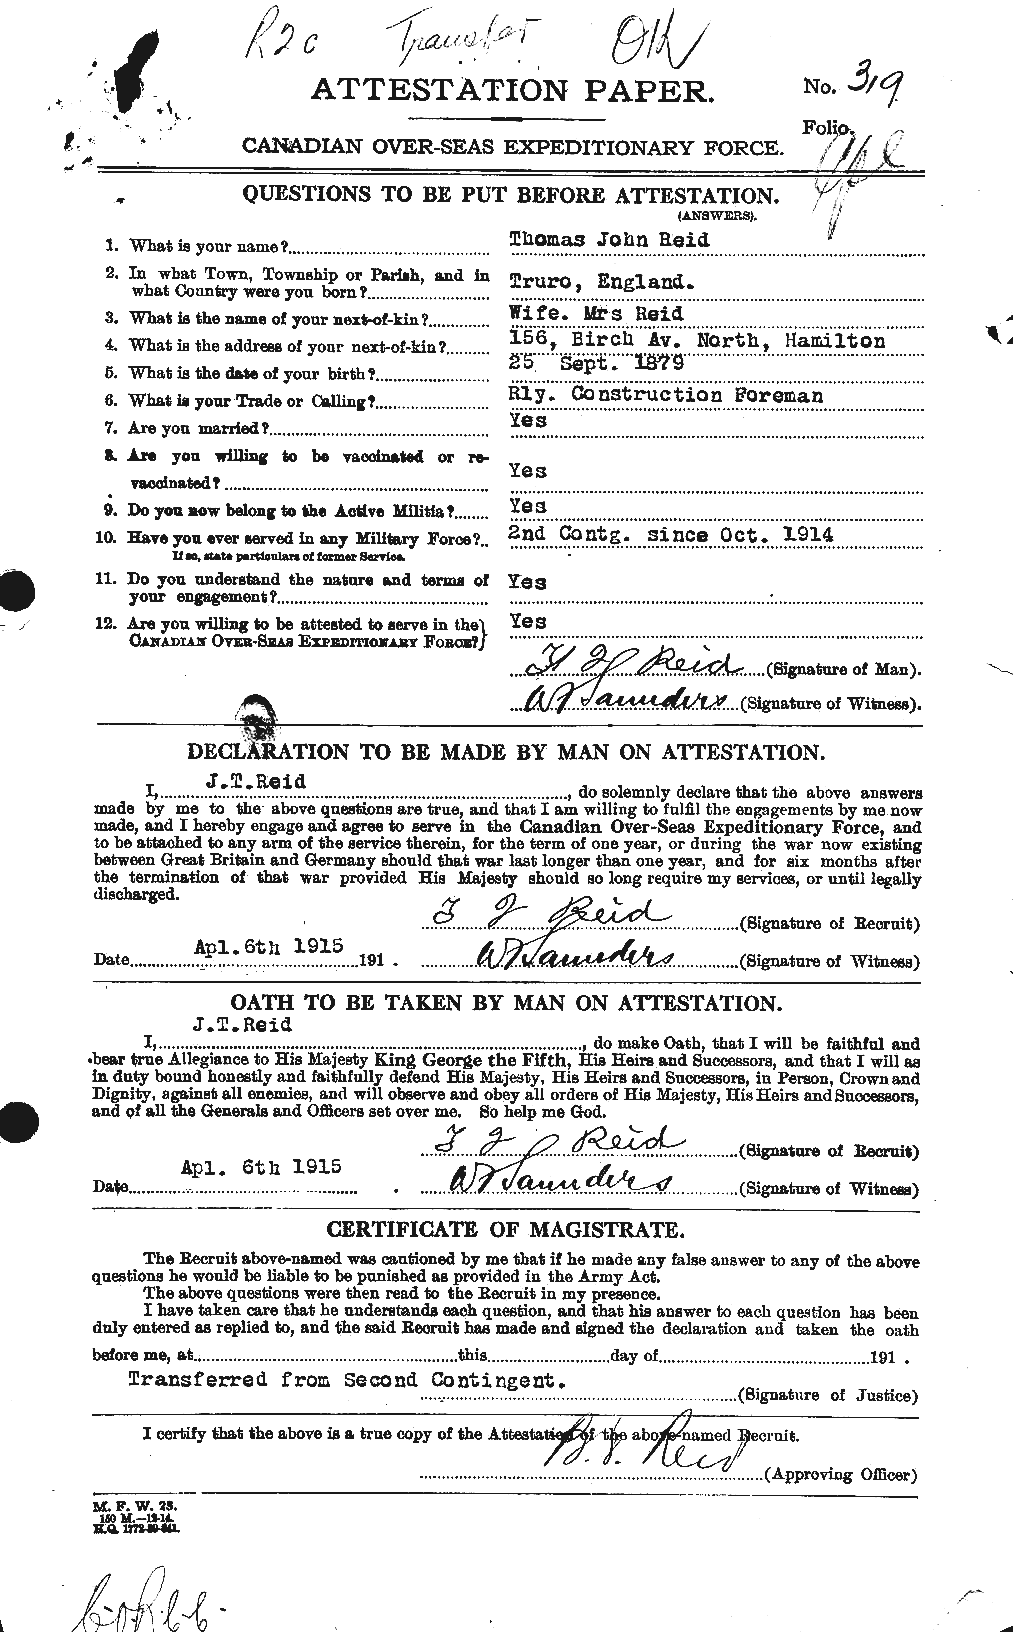 Personnel Records of the First World War - CEF 602000a